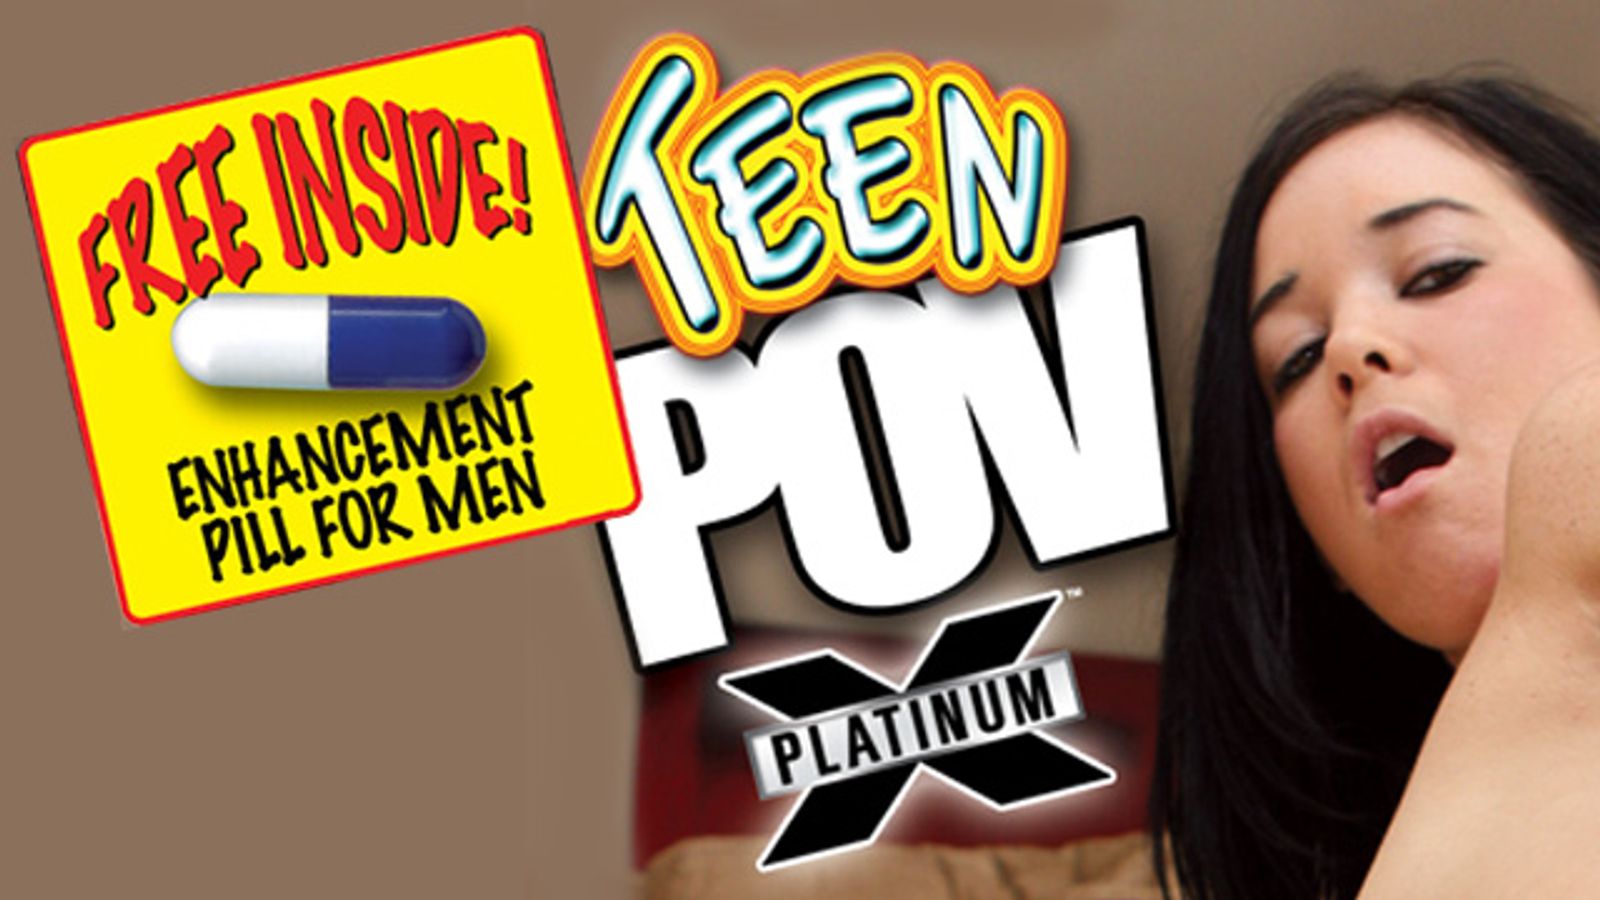 Platinum X Includes Male Enhancement Pill in <i>Teen POV</i> DVD